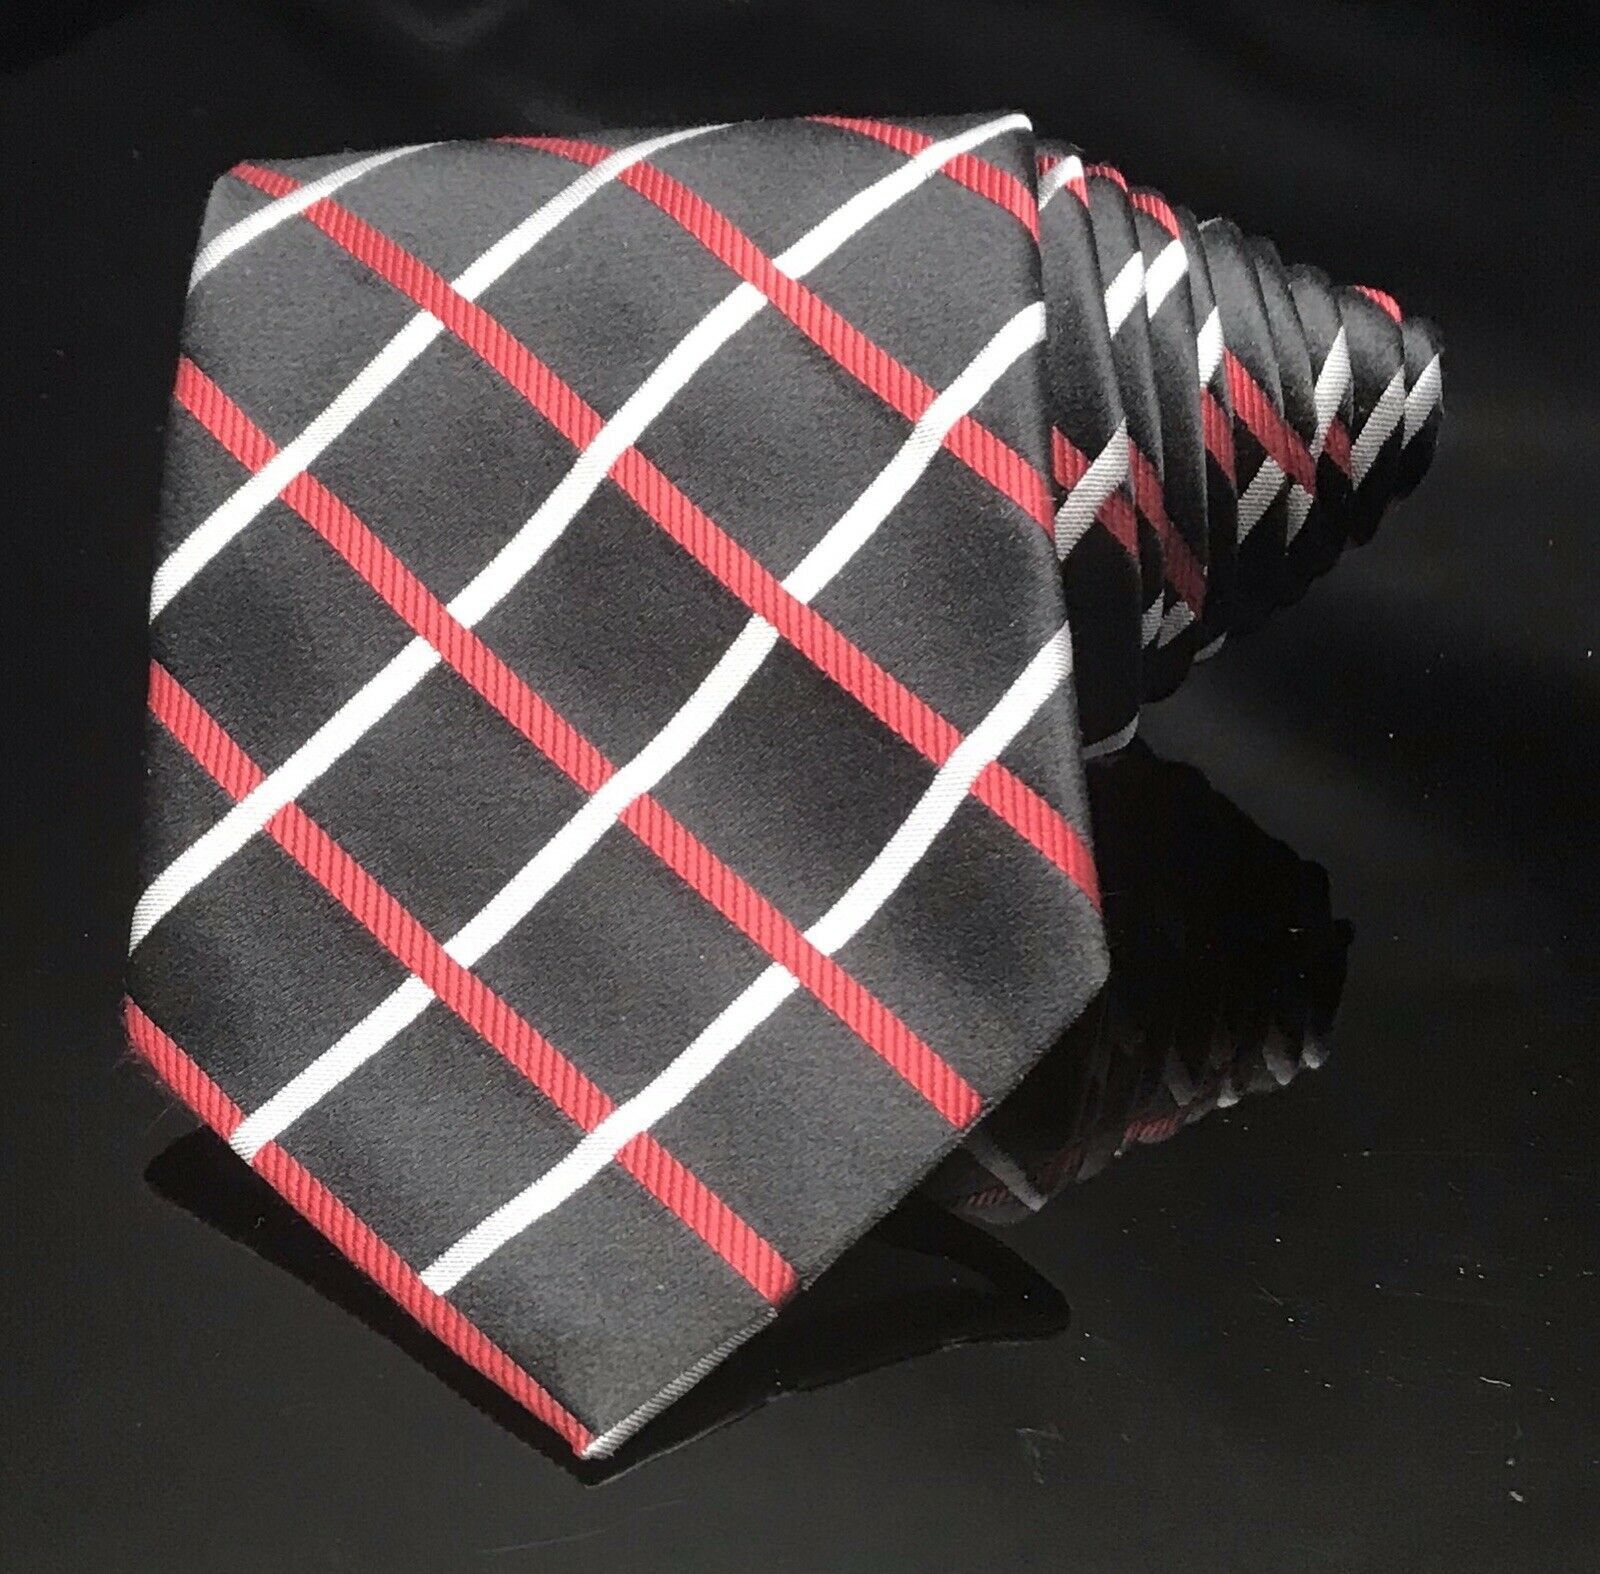 Donald Trump Signature DONALD TRUMP~ SIGNATURE COLLECTION Red Black TIE Size ONE SIZE - 2 Preview